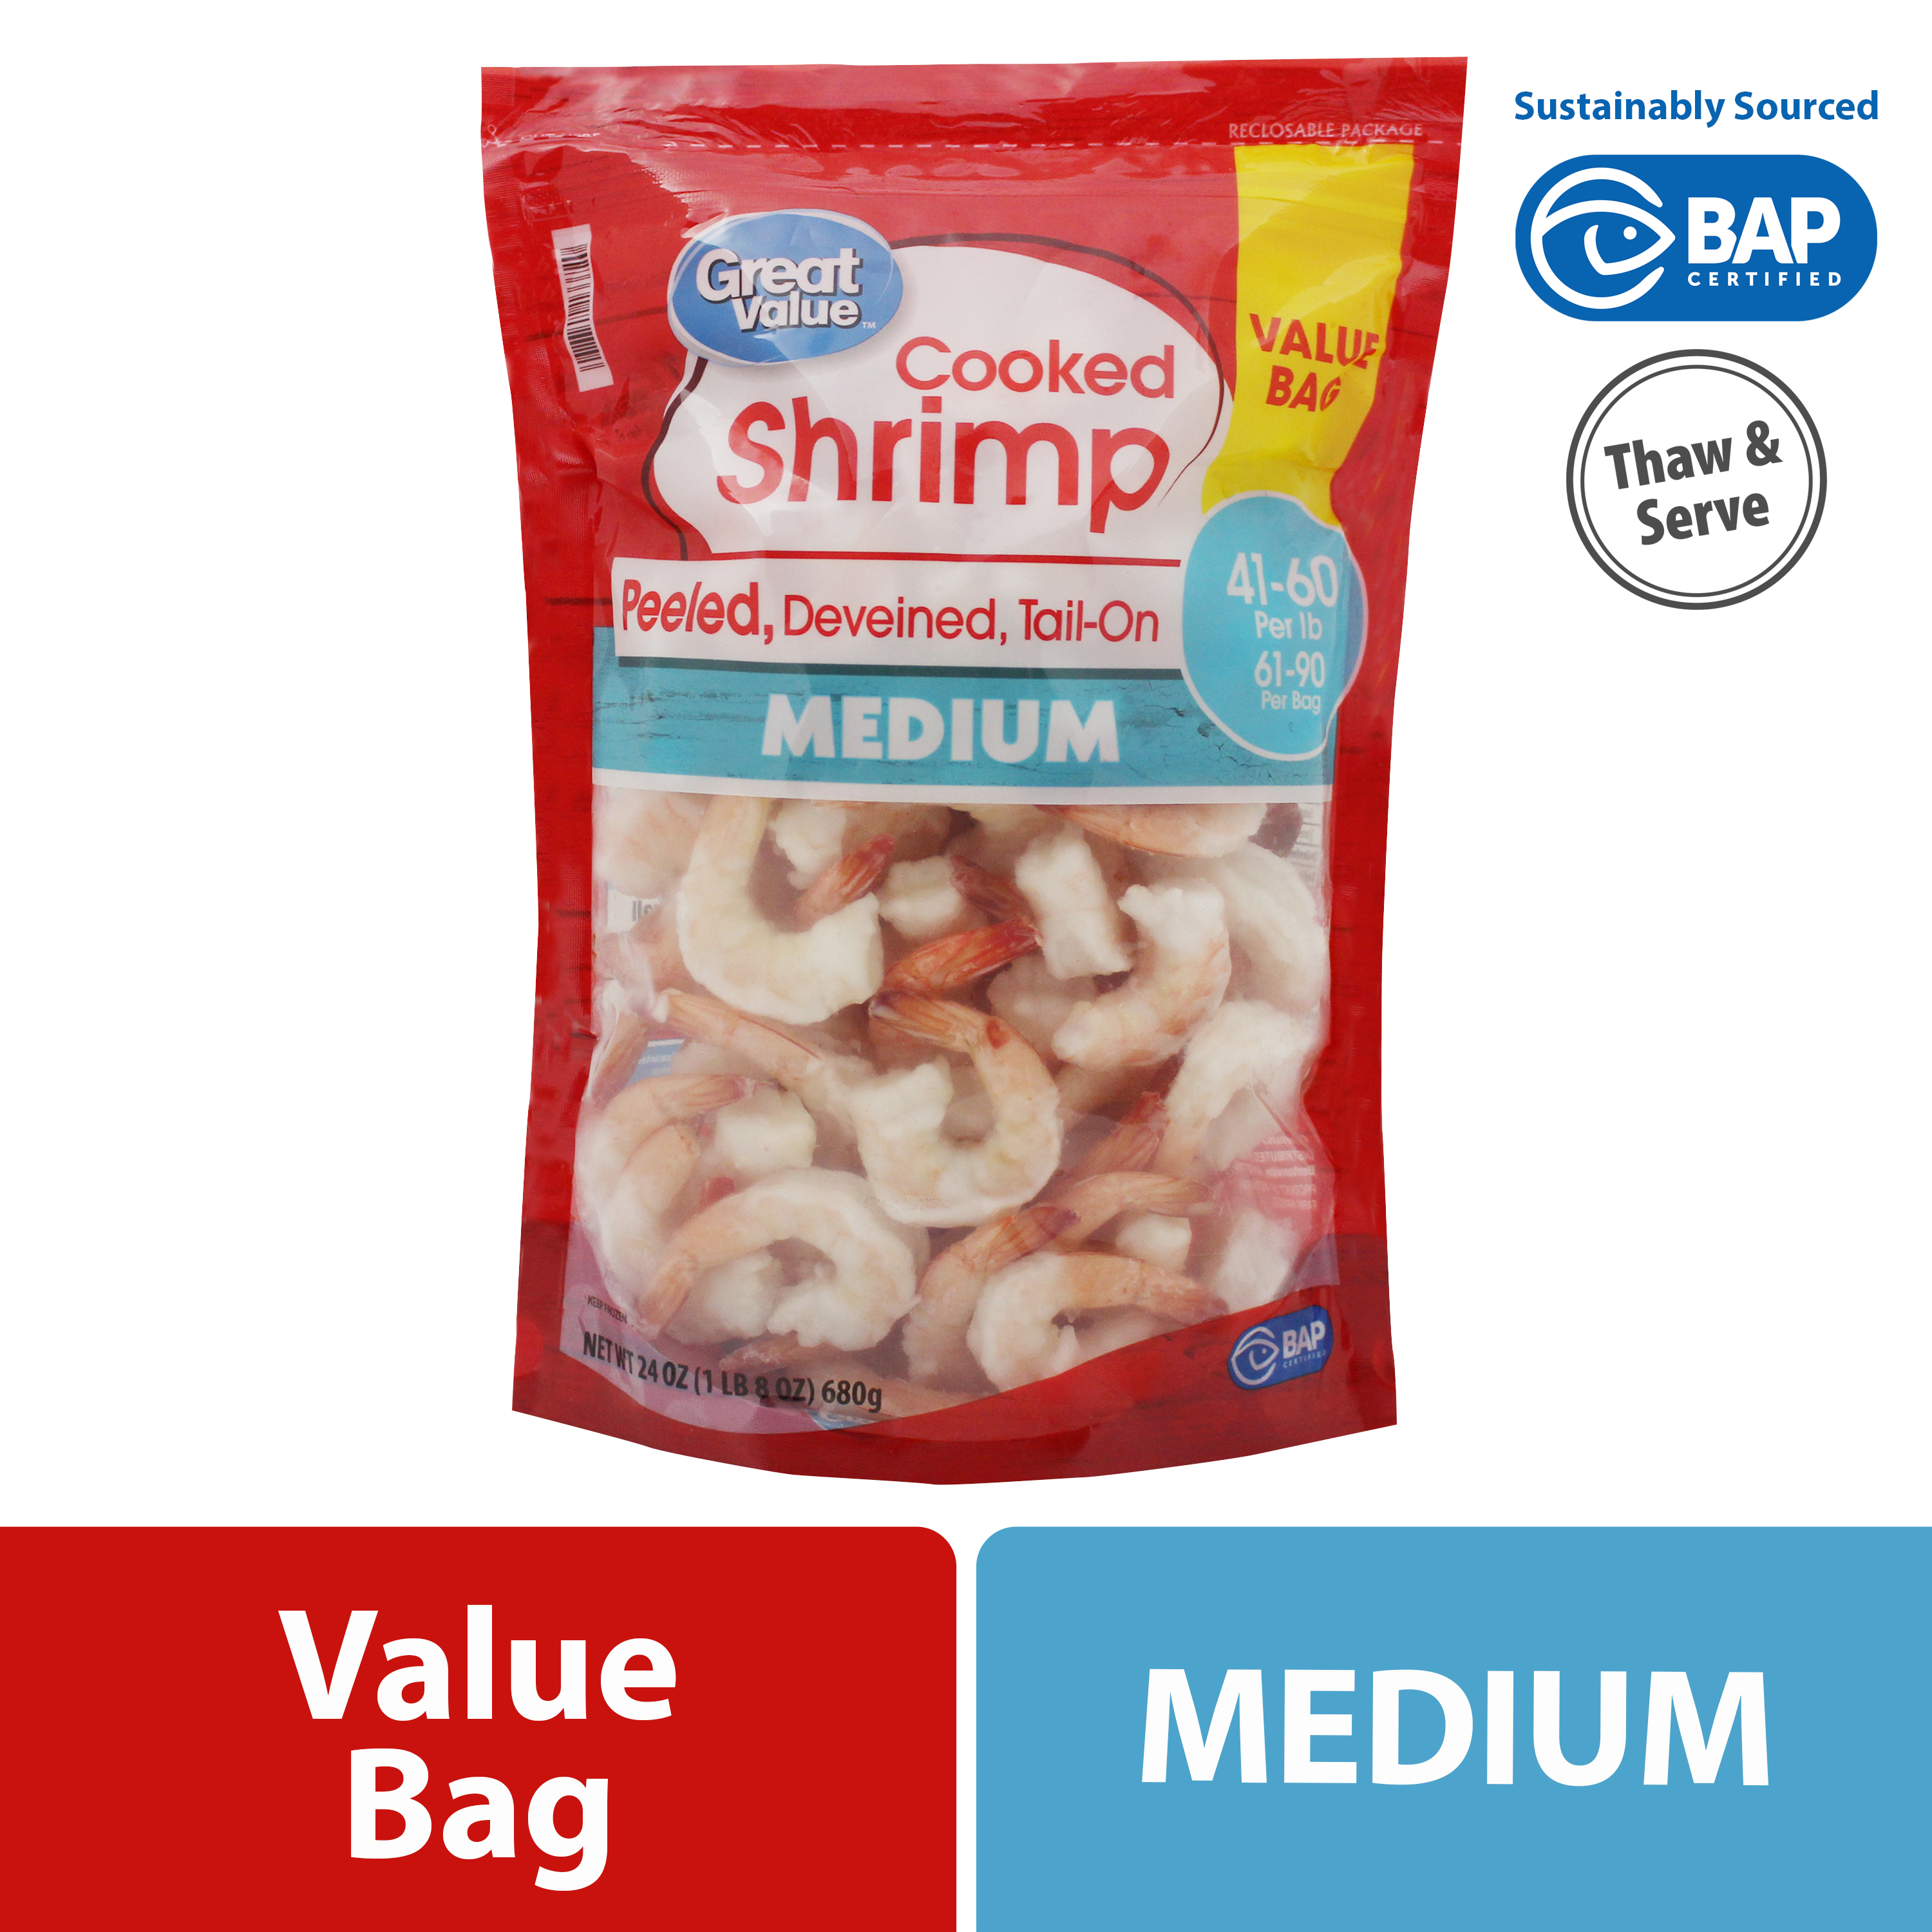 Great Value Frozen Cooked Medium Peeled Deveined Tail-On Shrimp, 24 oz Bag (41-60 count per lb) - image 1 of 10